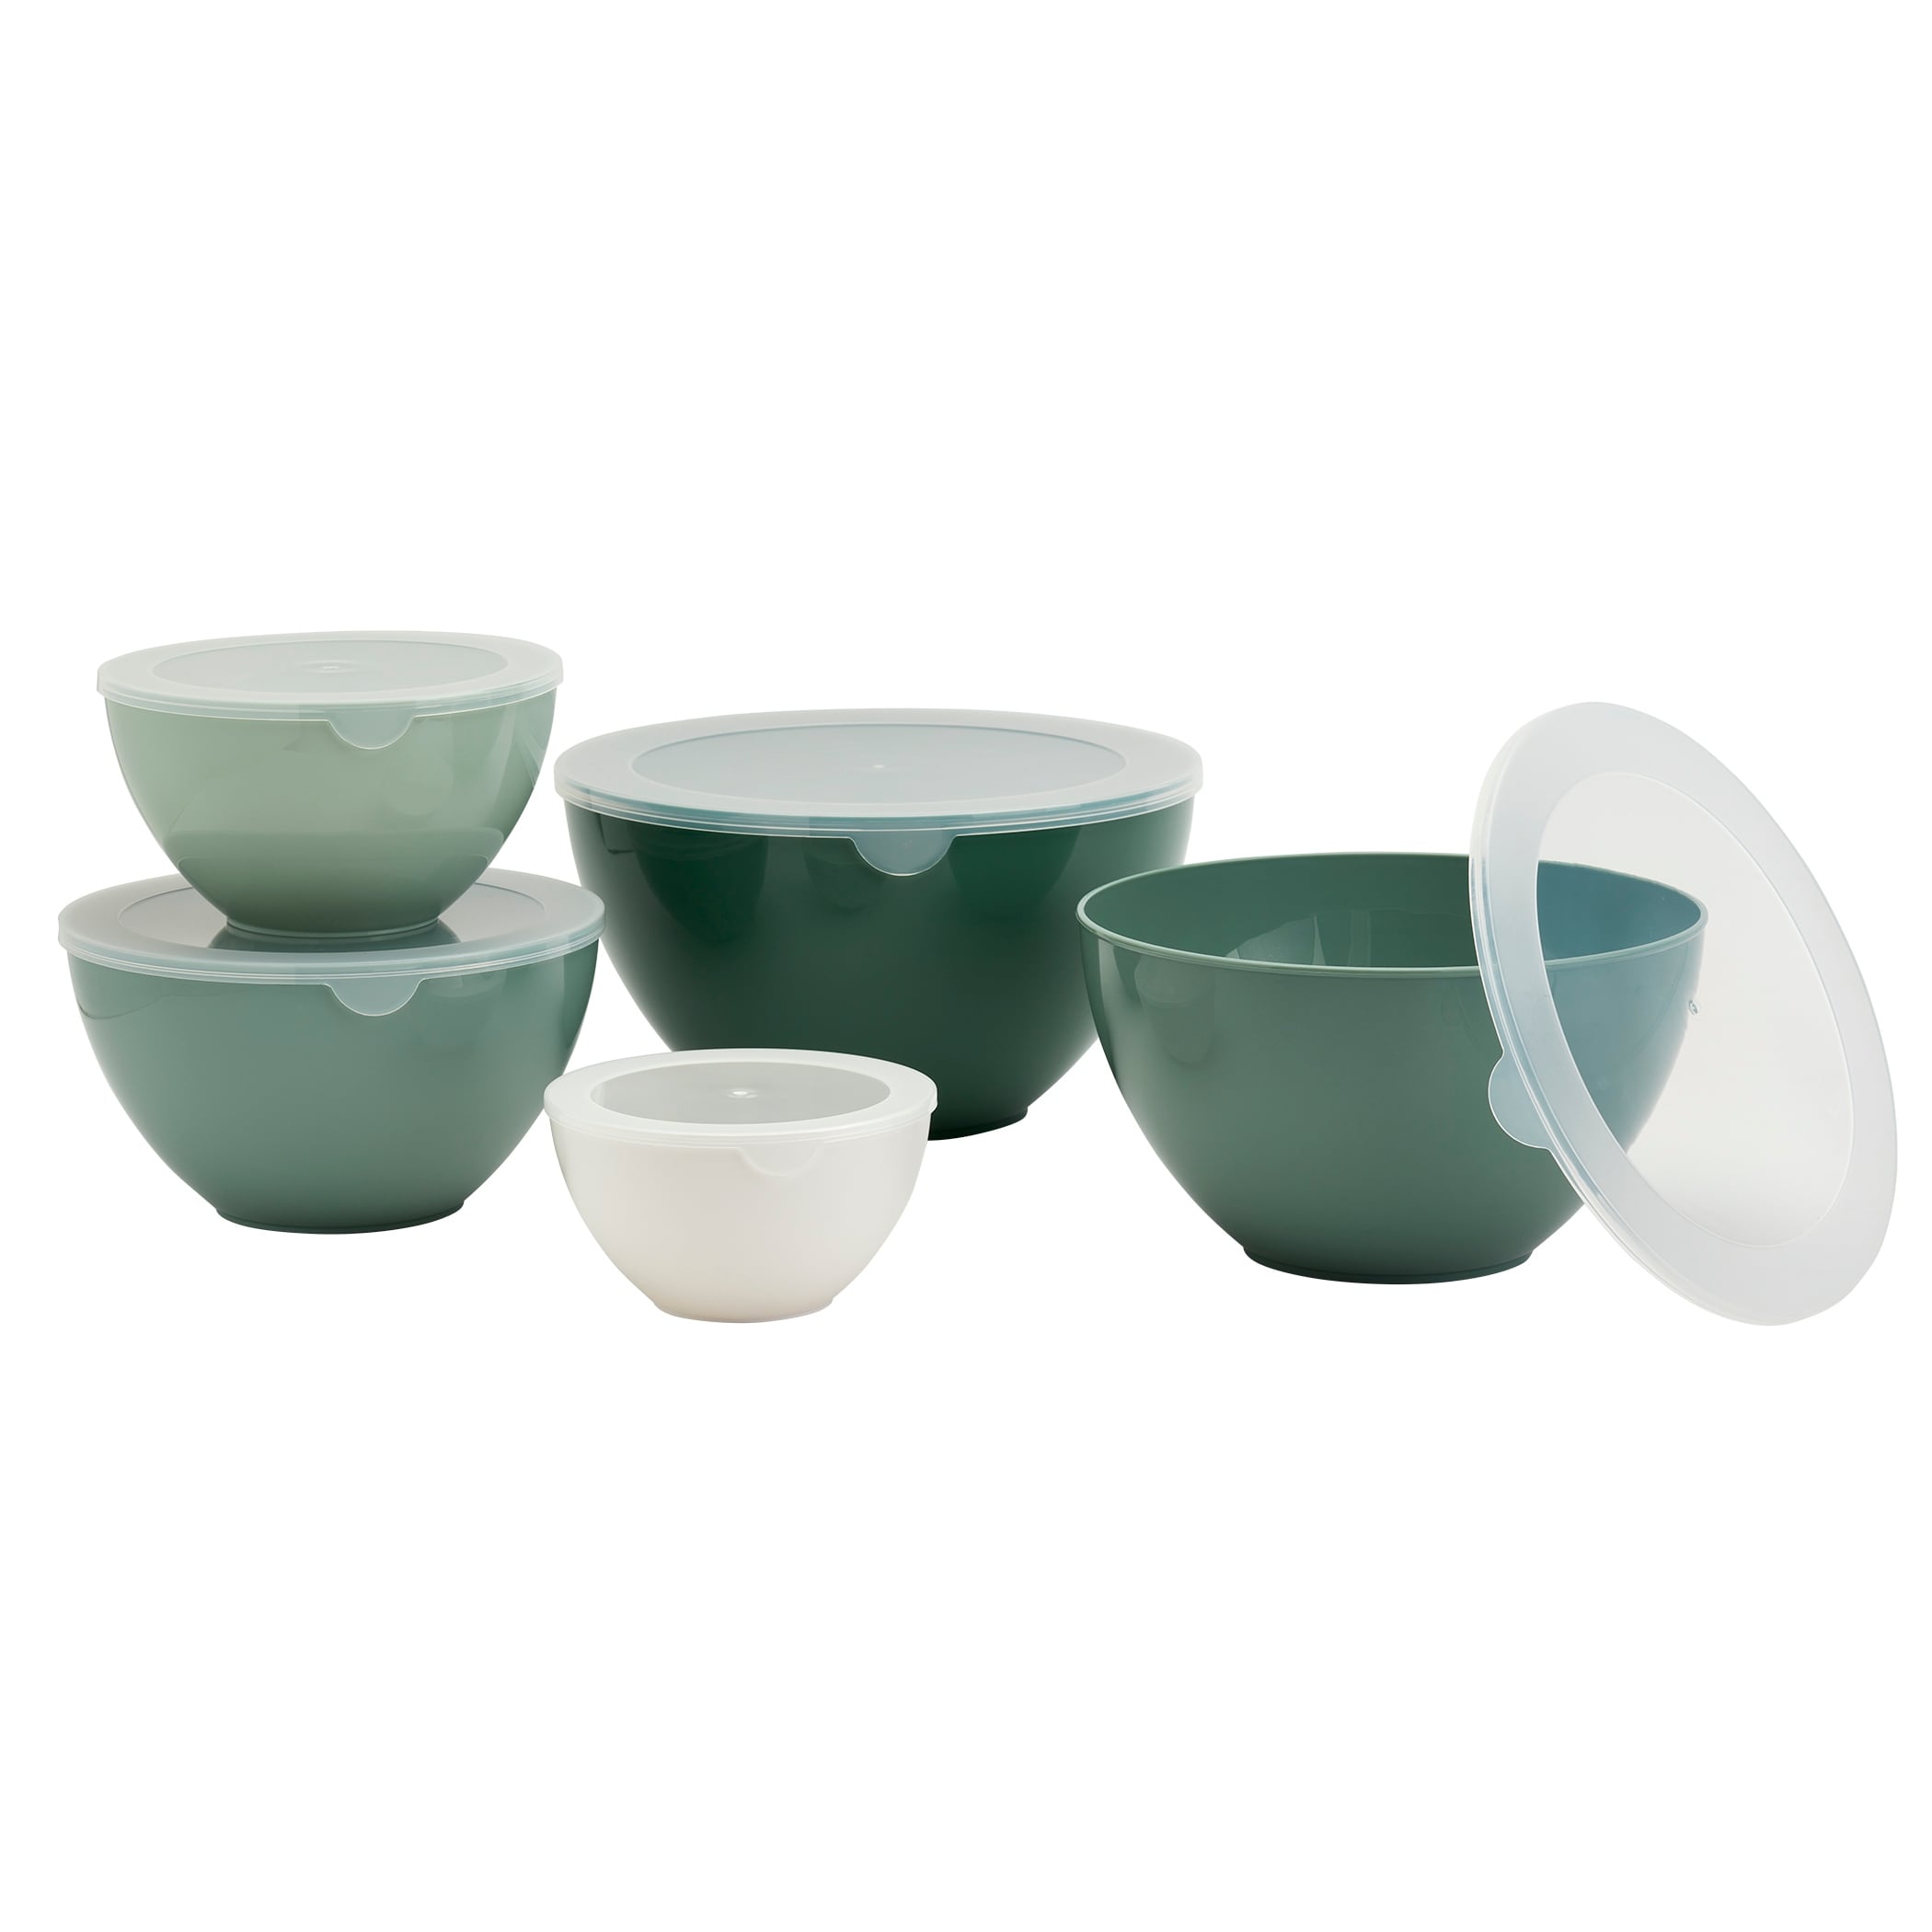 https://ak1.ostkcdn.com/images/products/is/images/direct/83a97446cd2dcfc66ef48779f081456c71043d4c/10-Piece-Mixing-Bowl-Set-with-Lids%2C-Gradient-Fern-Green.jpg